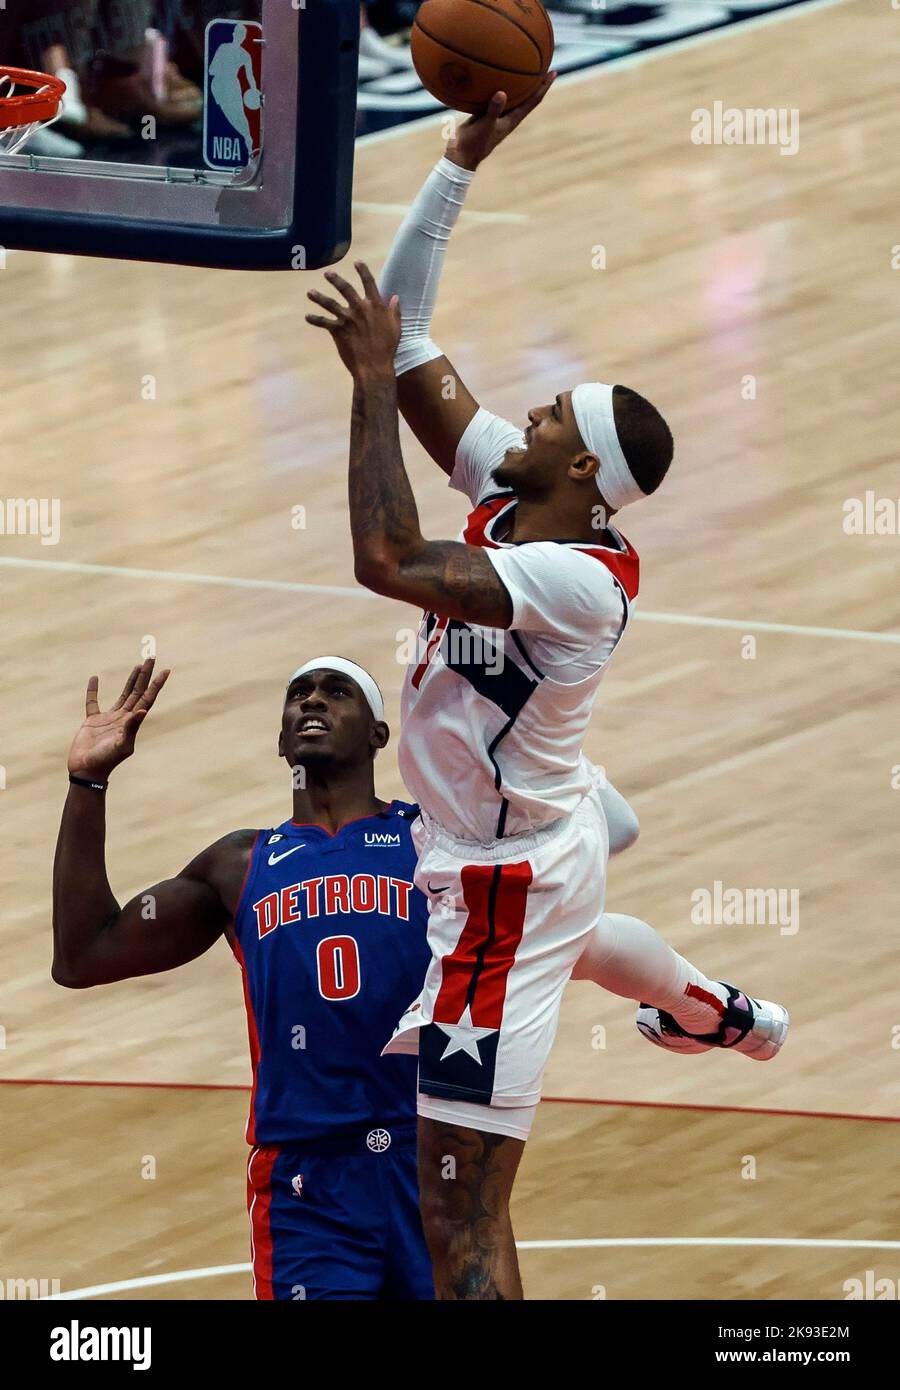 Washington, USA. 25th Oct, 2022. WASHINGTON, DC - OCTOBER 25: Washington Wizards center Daniel Gafford (21) shoots over Detroit Pistons center Jalen Duren (0) during a NBA game between the Washington Wizards and the Detroit Pistons, on October 25, 2022, at Capital One Arena, in Washington, DC. (Photo by Tony Quinn/SipaUSA) Credit: Sipa USA/Alamy Live News Stock Photo